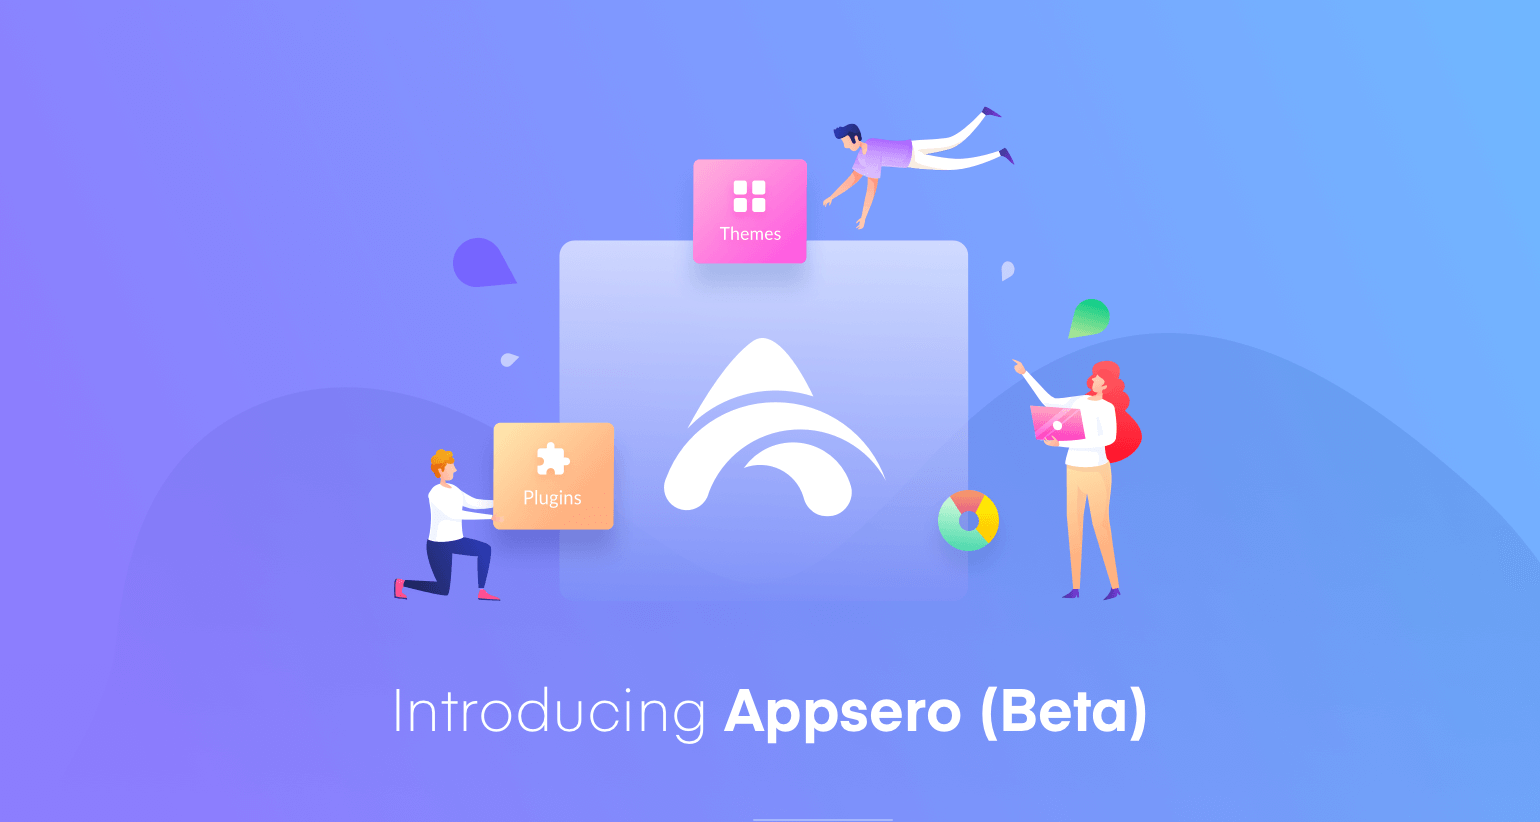 Introducing Appsero: An All in One Solution for WordPress Developers that Doesn’t Break The Bank!